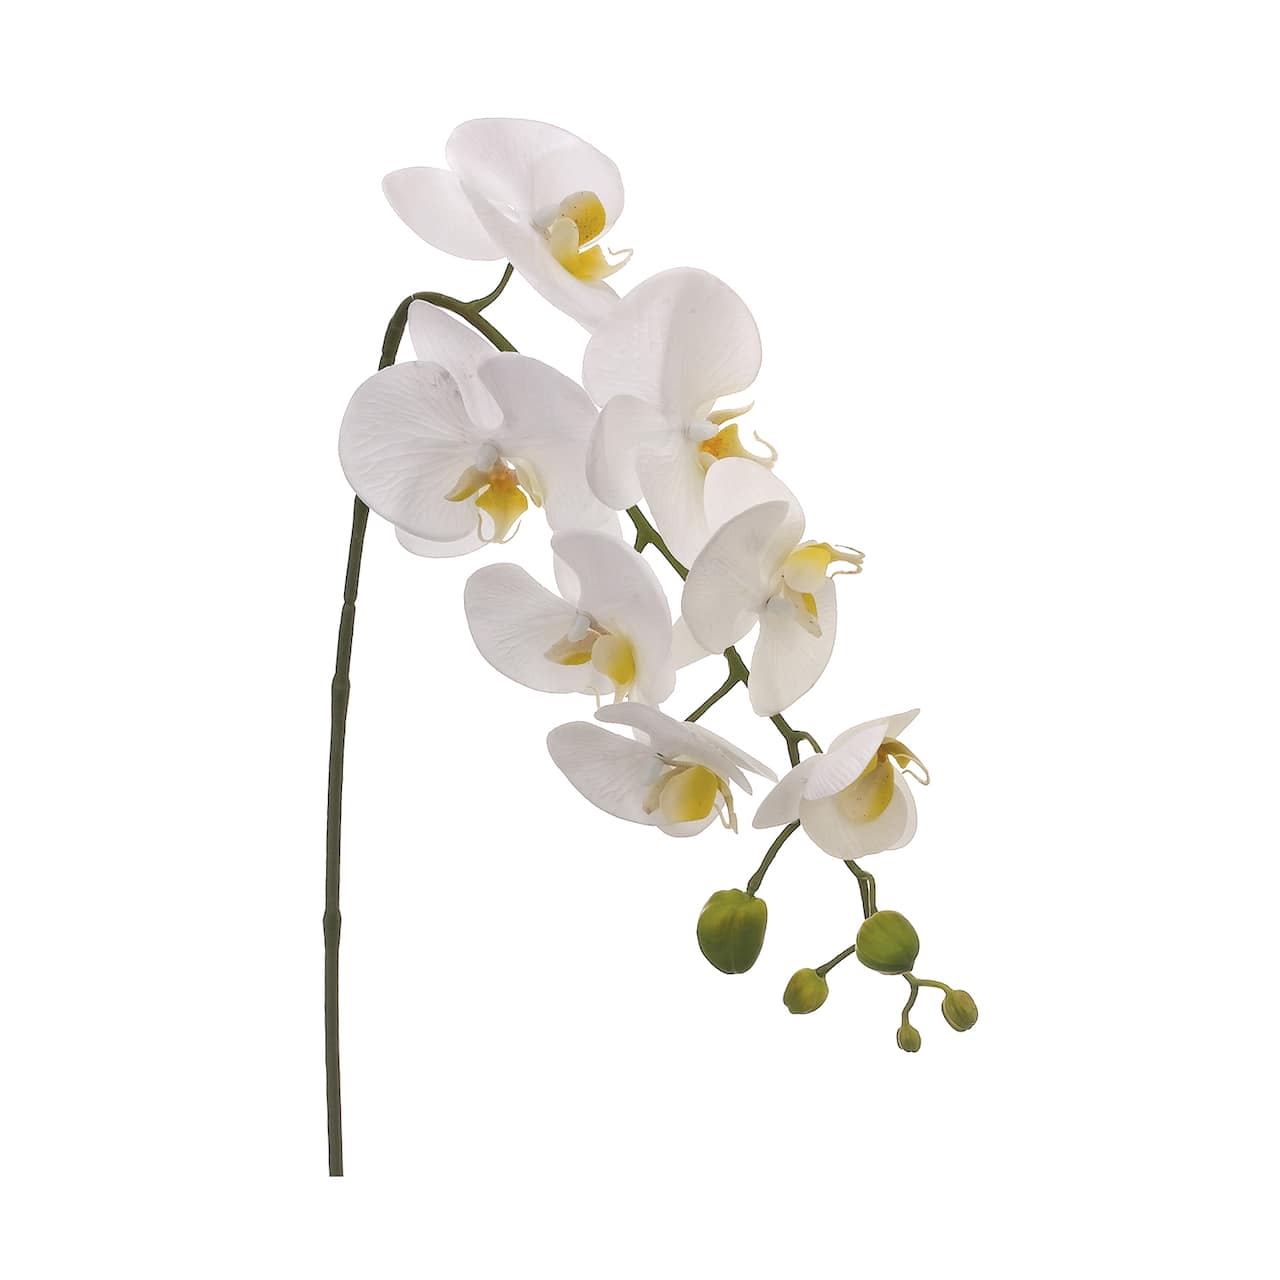 24 Pack: White Moth Orchid Spray